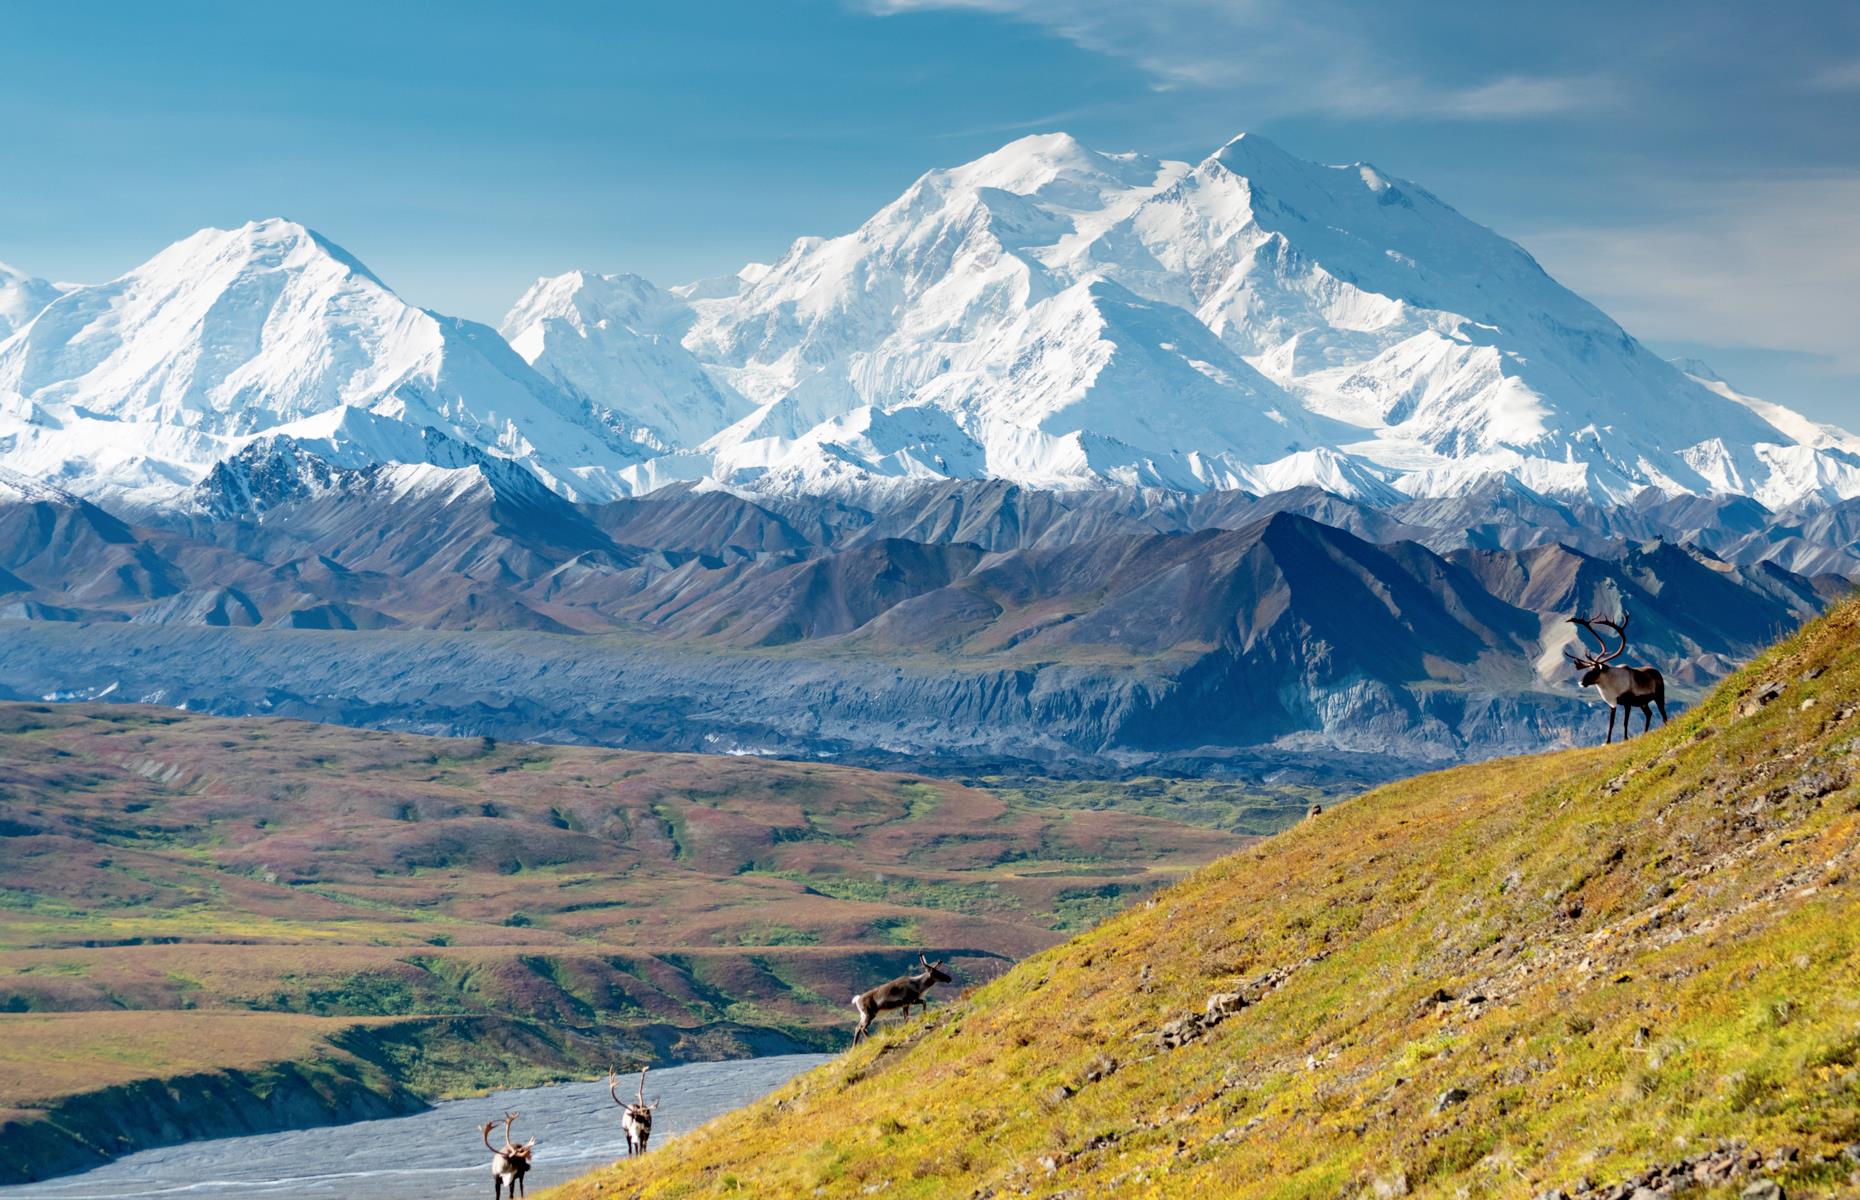 <p>Crowned by mighty Denali, the tallest peak in North America at 20,310 feet (6,190m), <a href="https://www.nps.gov/dena/index.htm">this national park</a> sprawls over six million rugged acres. Adventurous travelers come to hike through alpine tundra and lush boreal forest or to travel the winding Denali Park Road in one of the preserve's narrated tour buses. Wherever you are, keep an eye out for Denali's so-called Big Five: hulking moose, caribou, Dall sheep, wolves and, of course, grizzlies.</p>